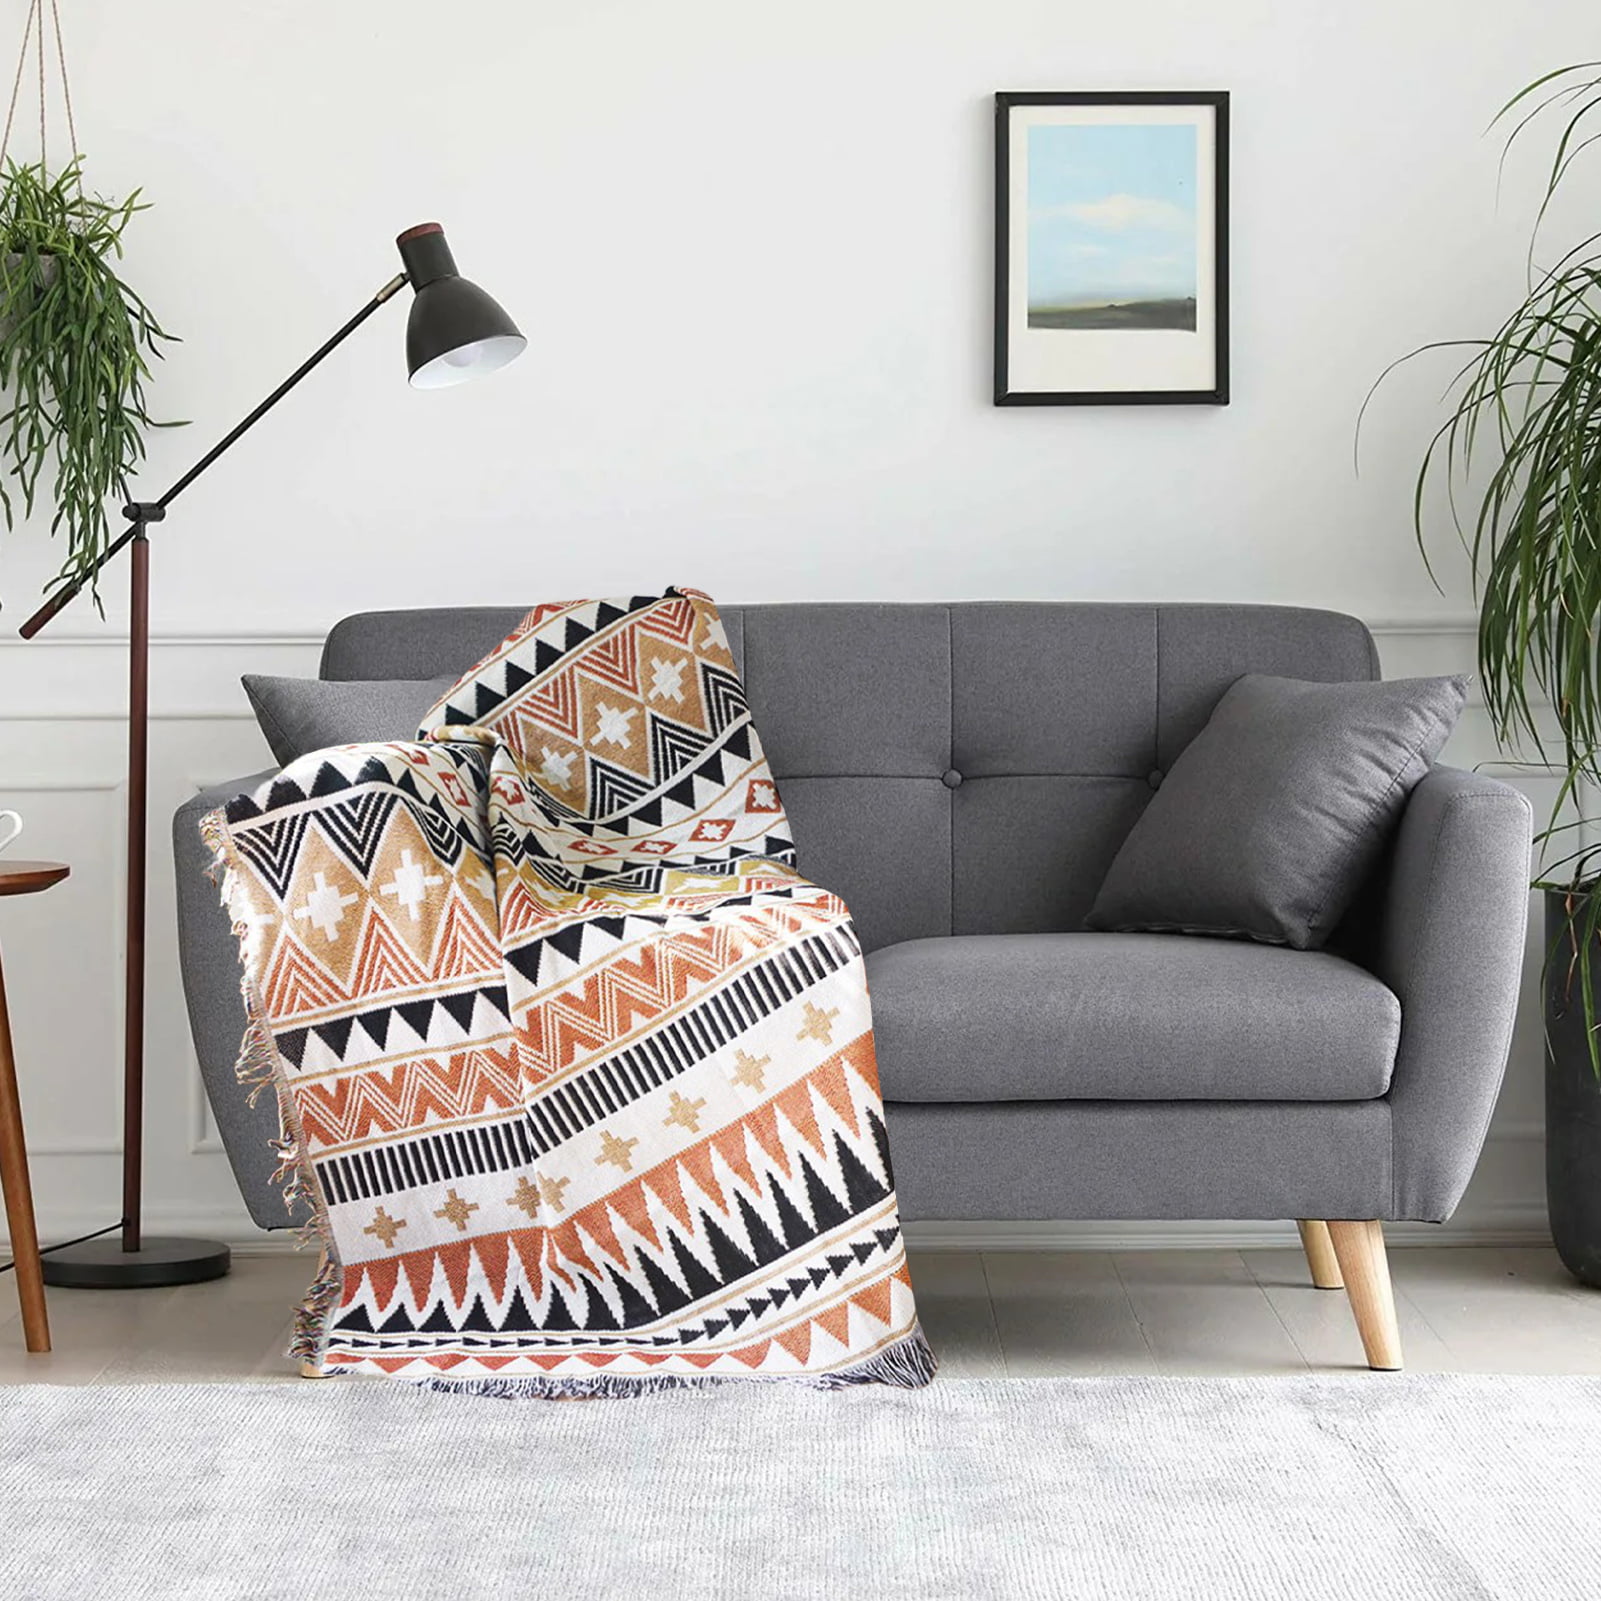  VEEYOO Grey Throw Blanket - Lightweight Extra Soft Throw Blanket  for Couch, Tassels Decor Knitted Blanket for Bedroom, Office, Gift, Grey  Stripe Travel Blanket 60x80 Inch : Home & Kitchen